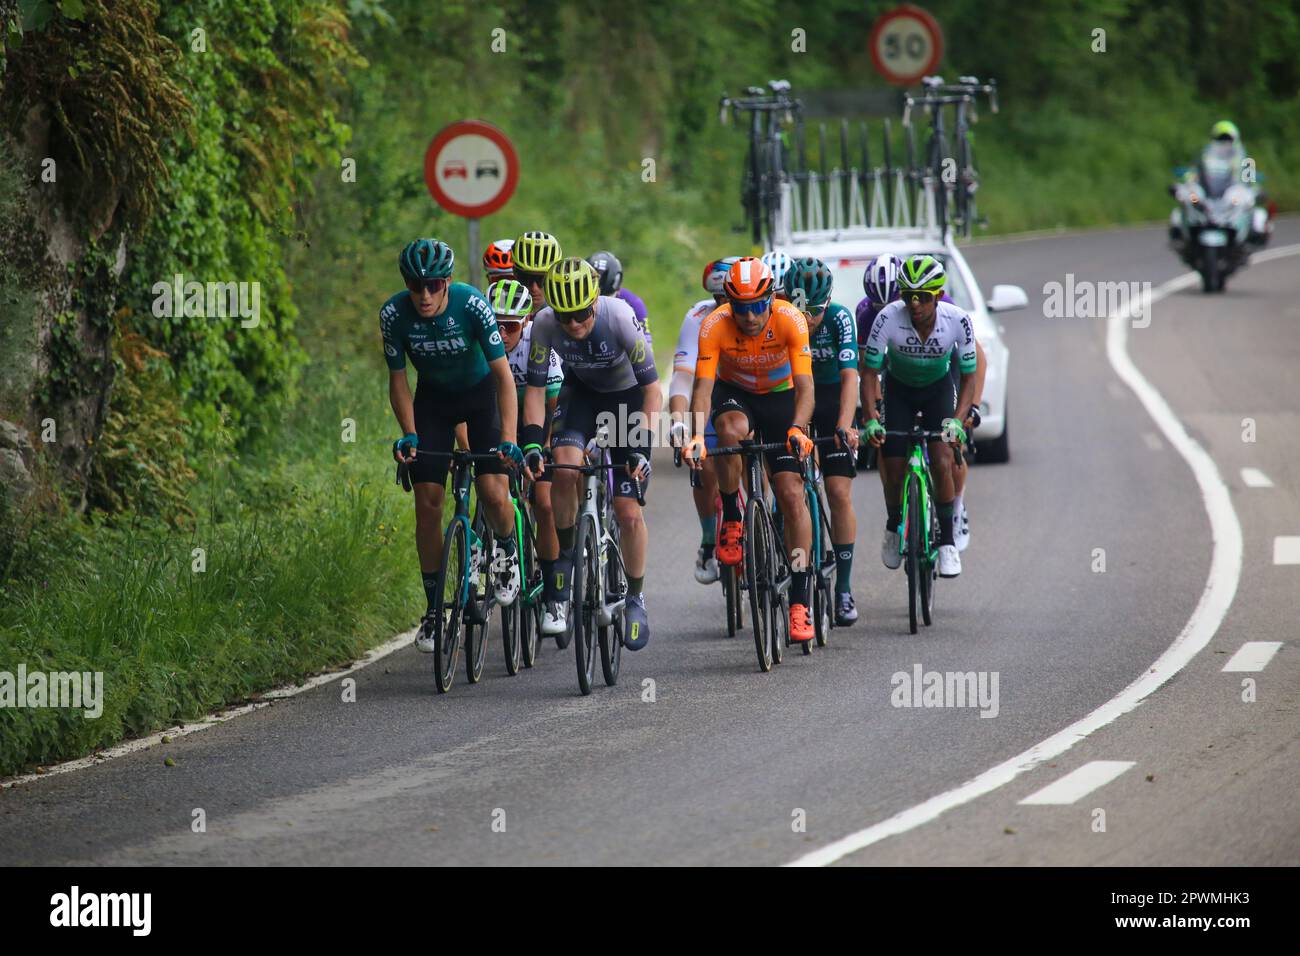 La Rodriga, Spain. 30th Apr, 2023. The breakaway led by Jon Agirre (Kern Pharma Team, L) and Carl Fredrik Hagen (Q36.5 Pro Cycling Team, R) during the 3rd stage of the Vuelta a Asturias 2023 between Cangas del Narcea and Oviedo, on April 30, 2023, in La Rodriga, Spain. (Photo by Alberto Brevers/Pacific Press) Credit: Pacific Press Media Production Corp./Alamy Live News Stock Photo